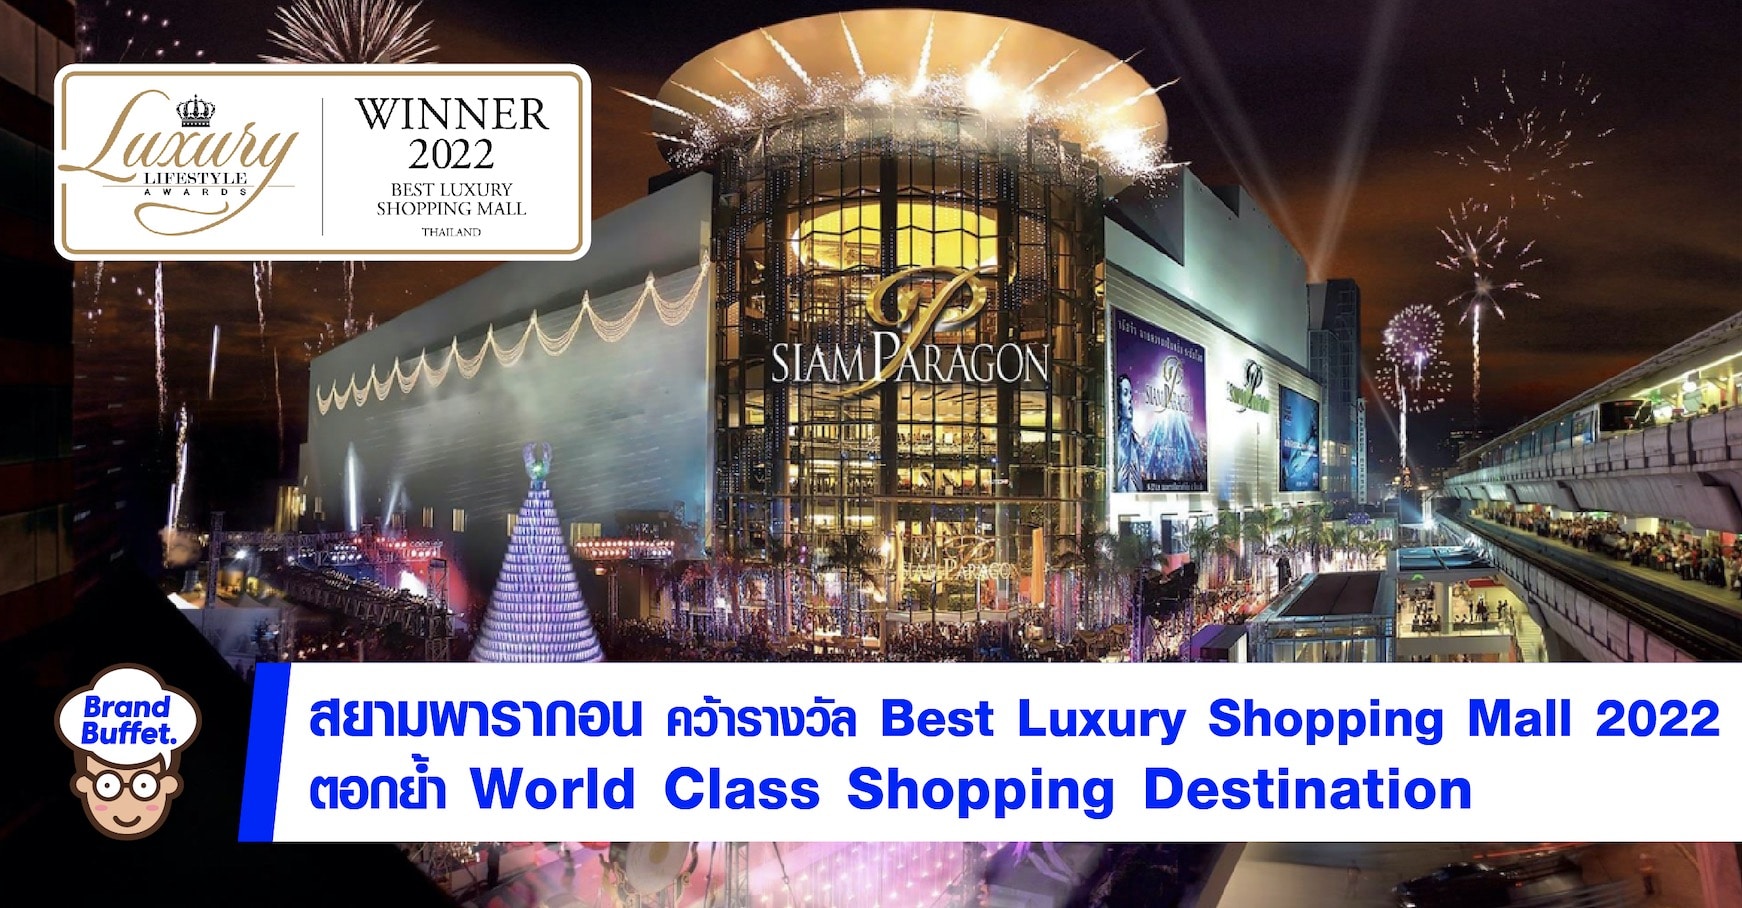 Siam Paragon Wins Luxury Lifestyle Award for Best Luxury Shopping Mall in  Thailand – Luxury Lifestyle in Asia Thailand, Best Community Website